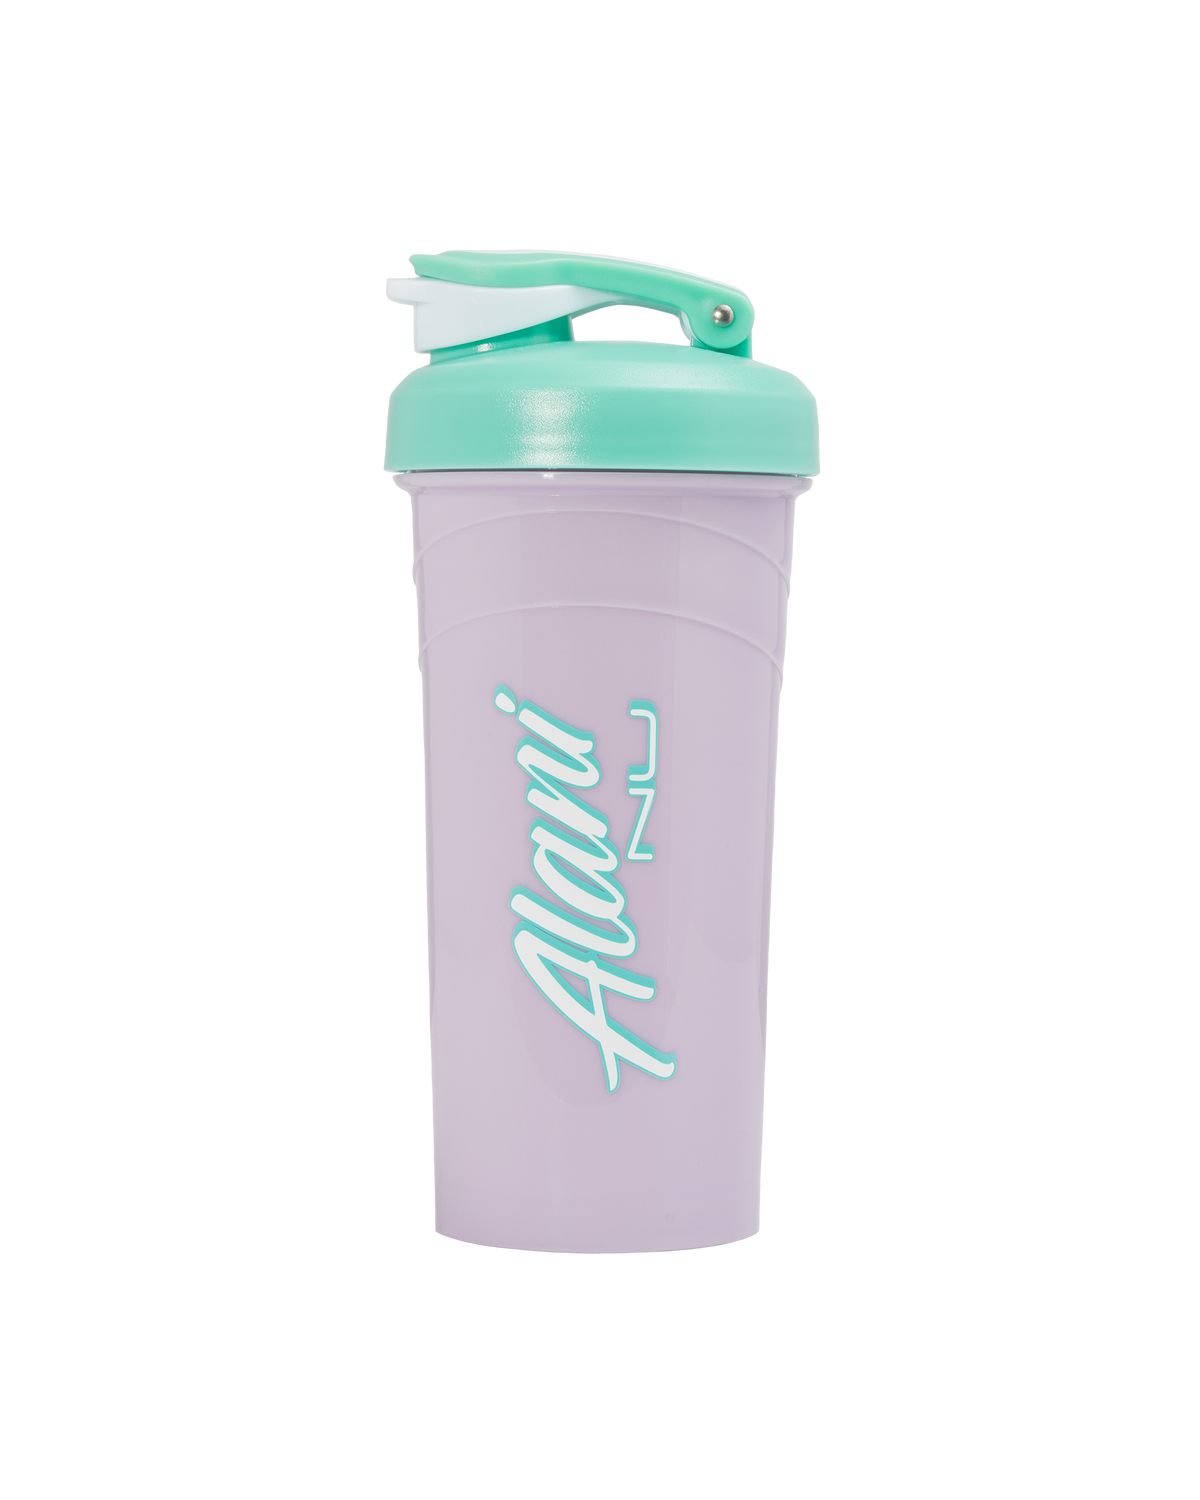 A front-facing image of 20oz Shaker in Lavender Sky with Alani logo.